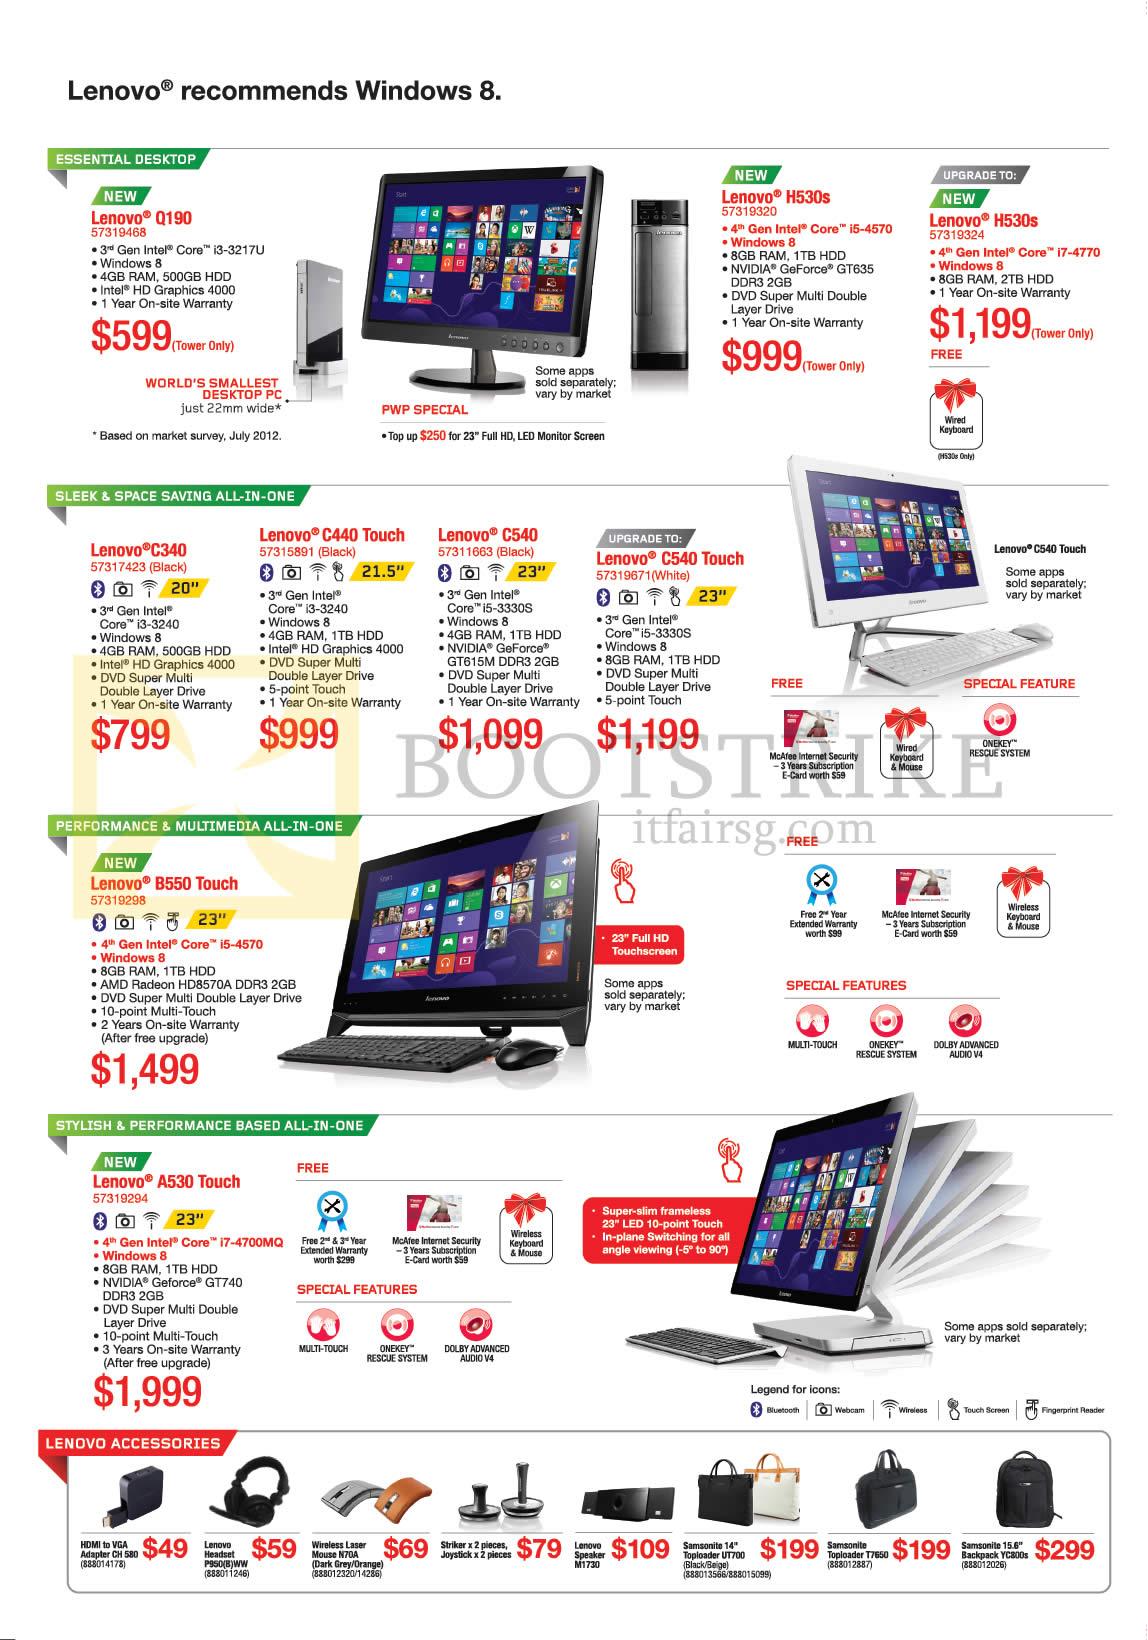 SITEX 2013 price list image brochure of Lenovo Desktop PCs Q190 H530s, AIO Desktop PCs C340, C440 Touch, C540, A530, B550, Accessories, Mouse, Bags